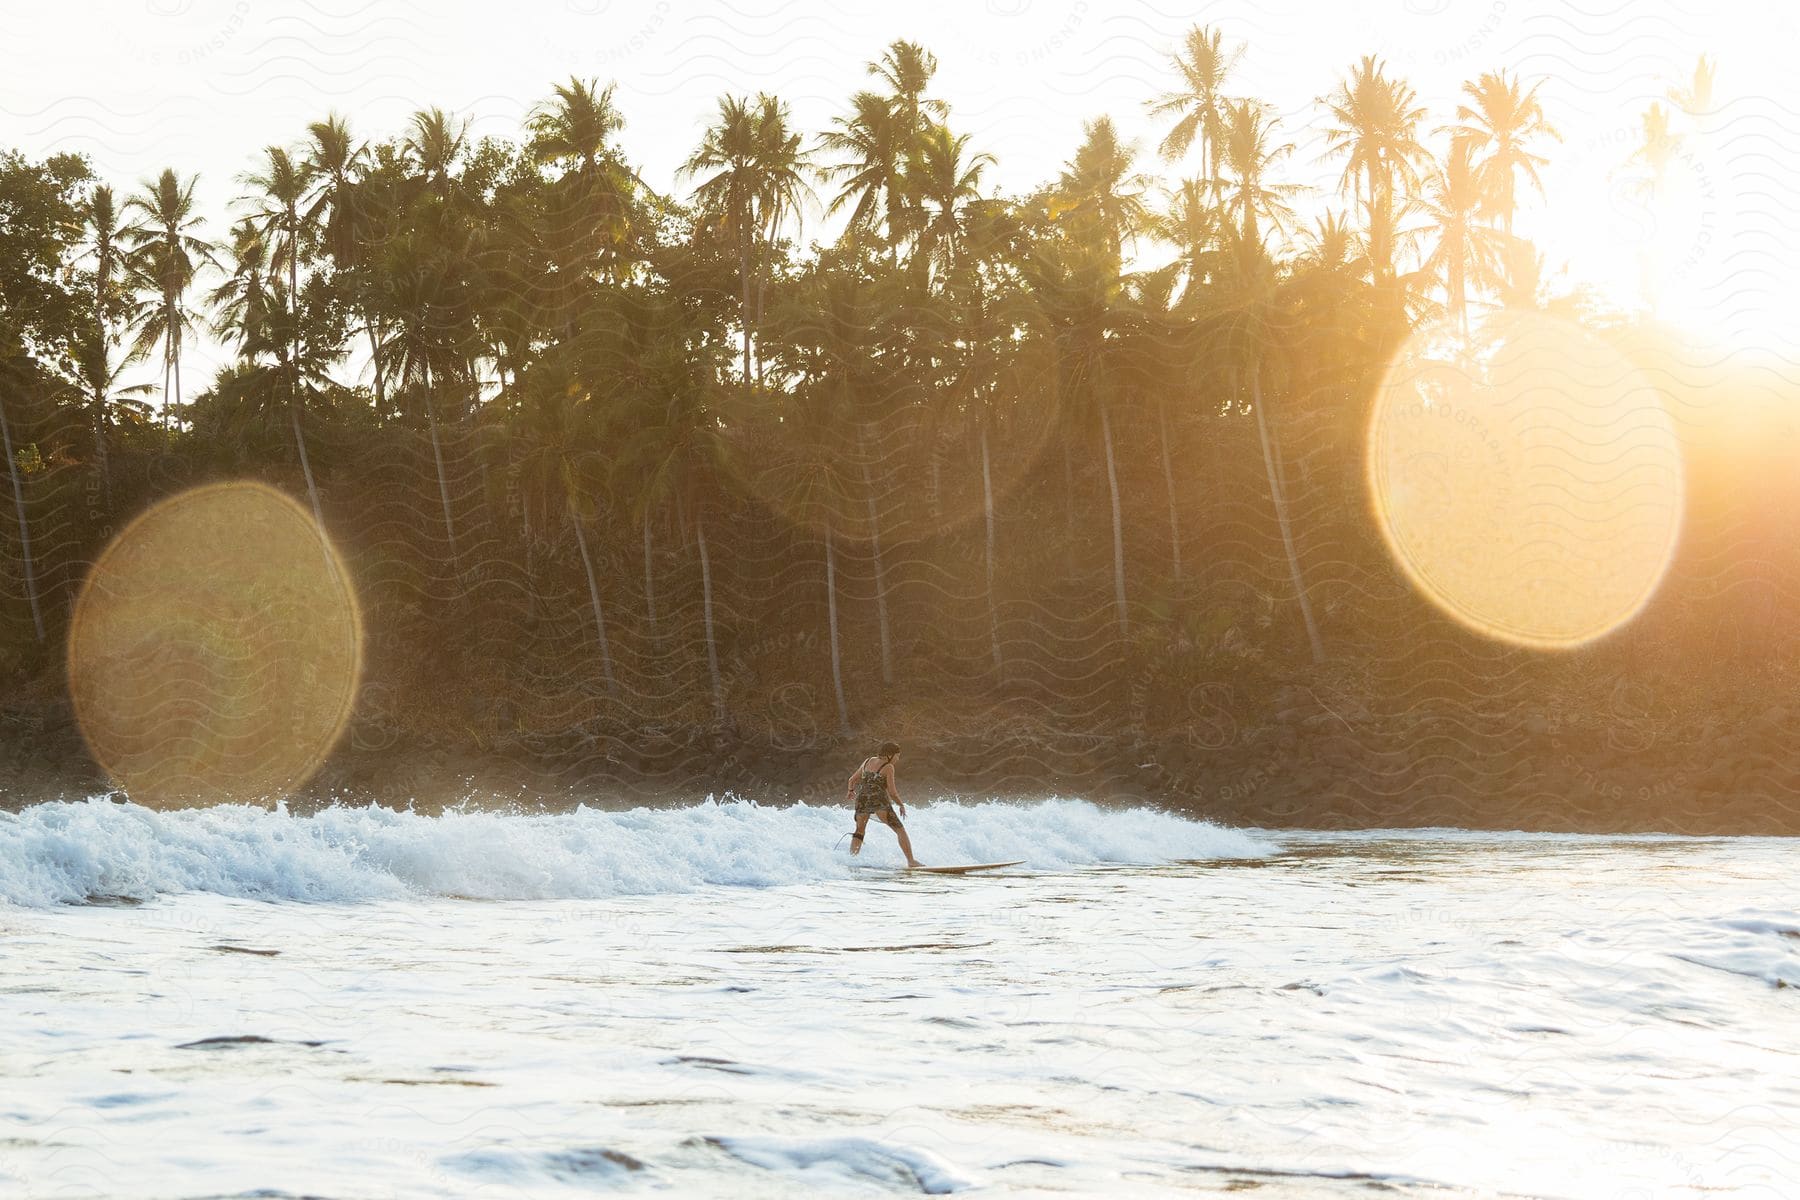 On a sunny evening near the shore, a man is surfing in the ocean, with palm trees lining the shore.